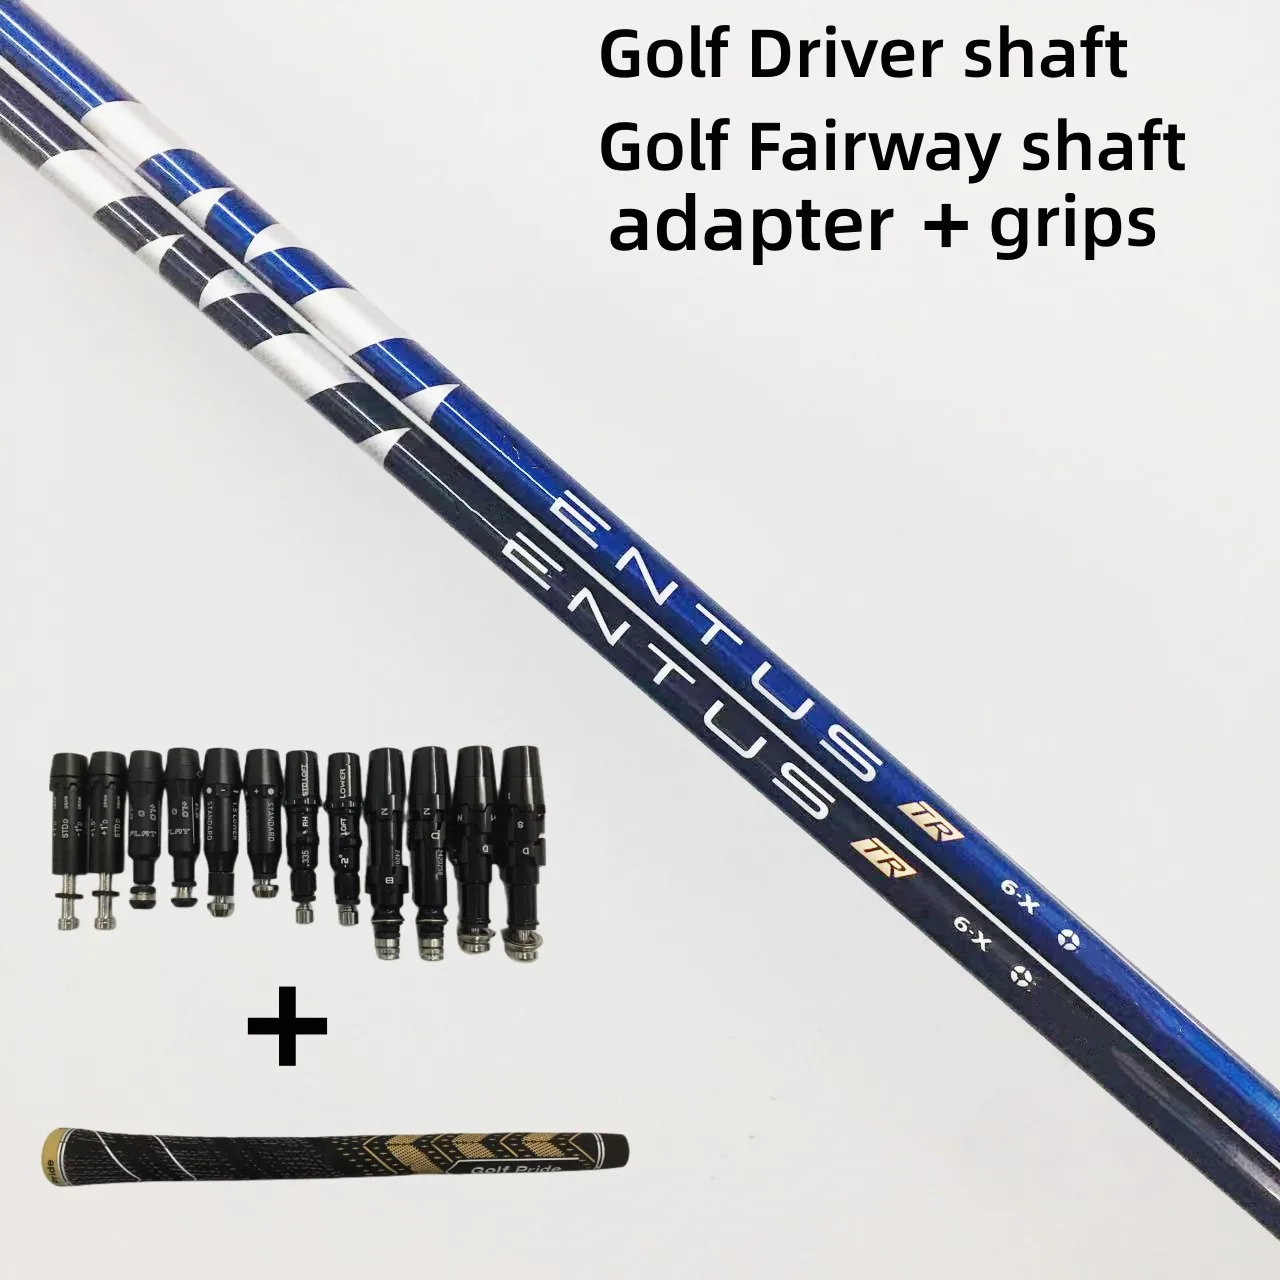 

New Golf clubs shaft fuji TR blue/black 6 R/S/X graphite material golf driver and Fairway woods shaft Install adapter and grip